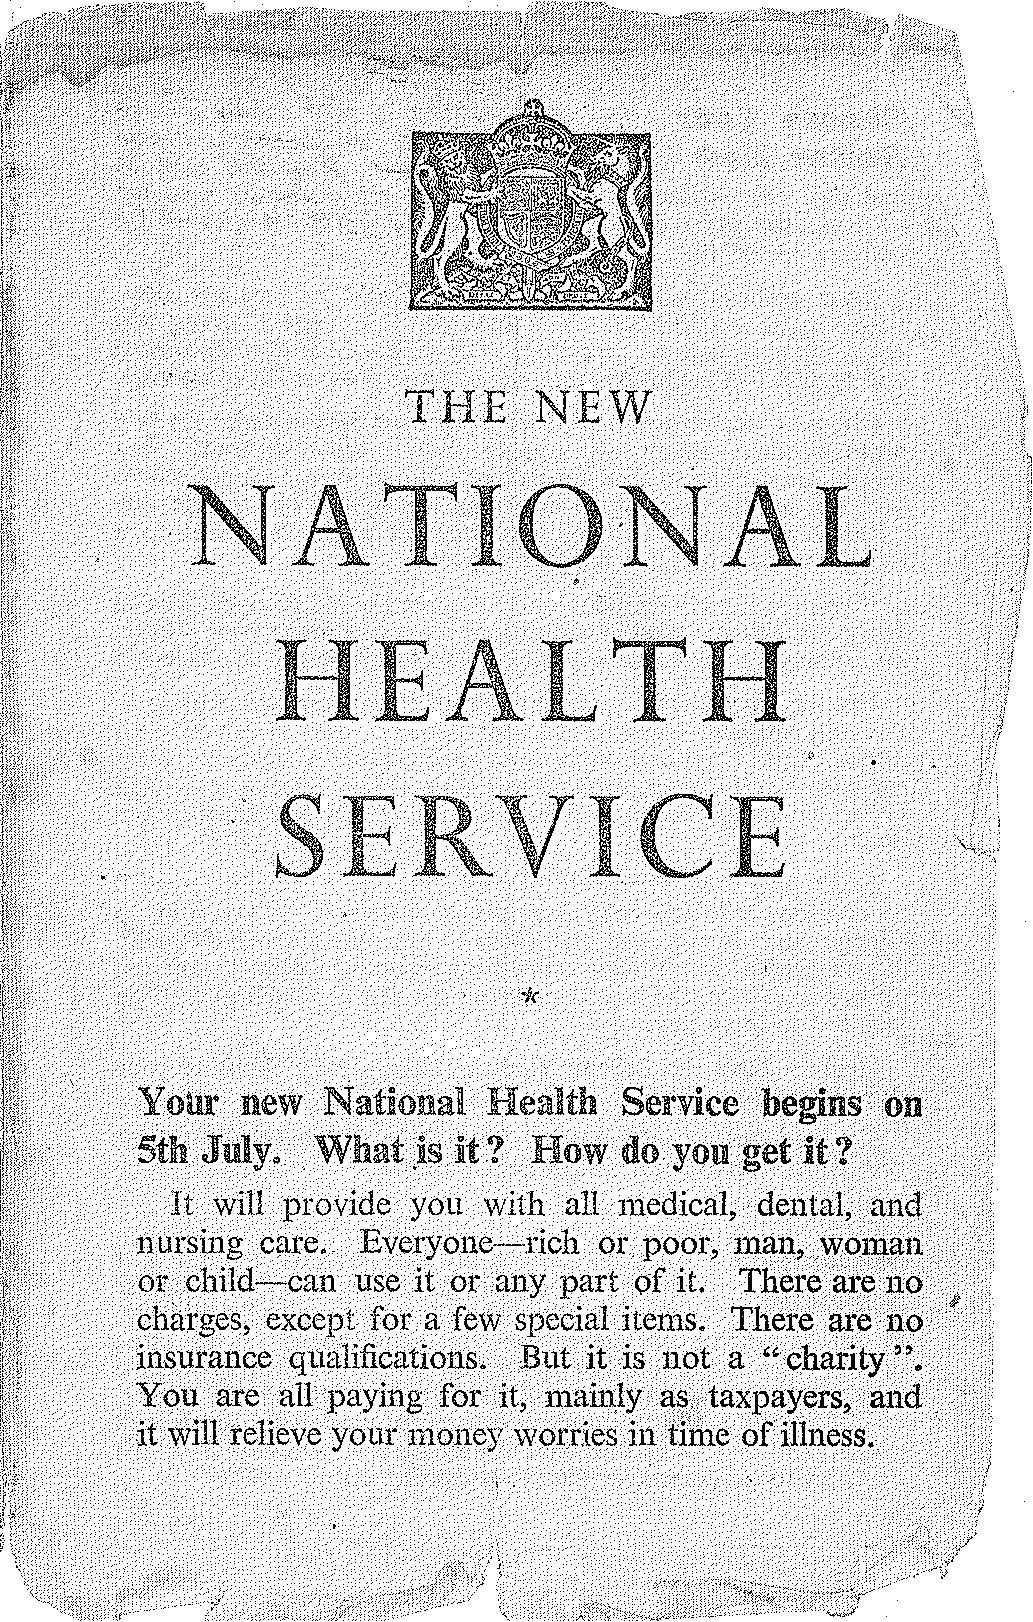 Leaflet with British crest at the top titled "The New National Health Service", which says that it will answer questions such as "What is it? How do you get it?"